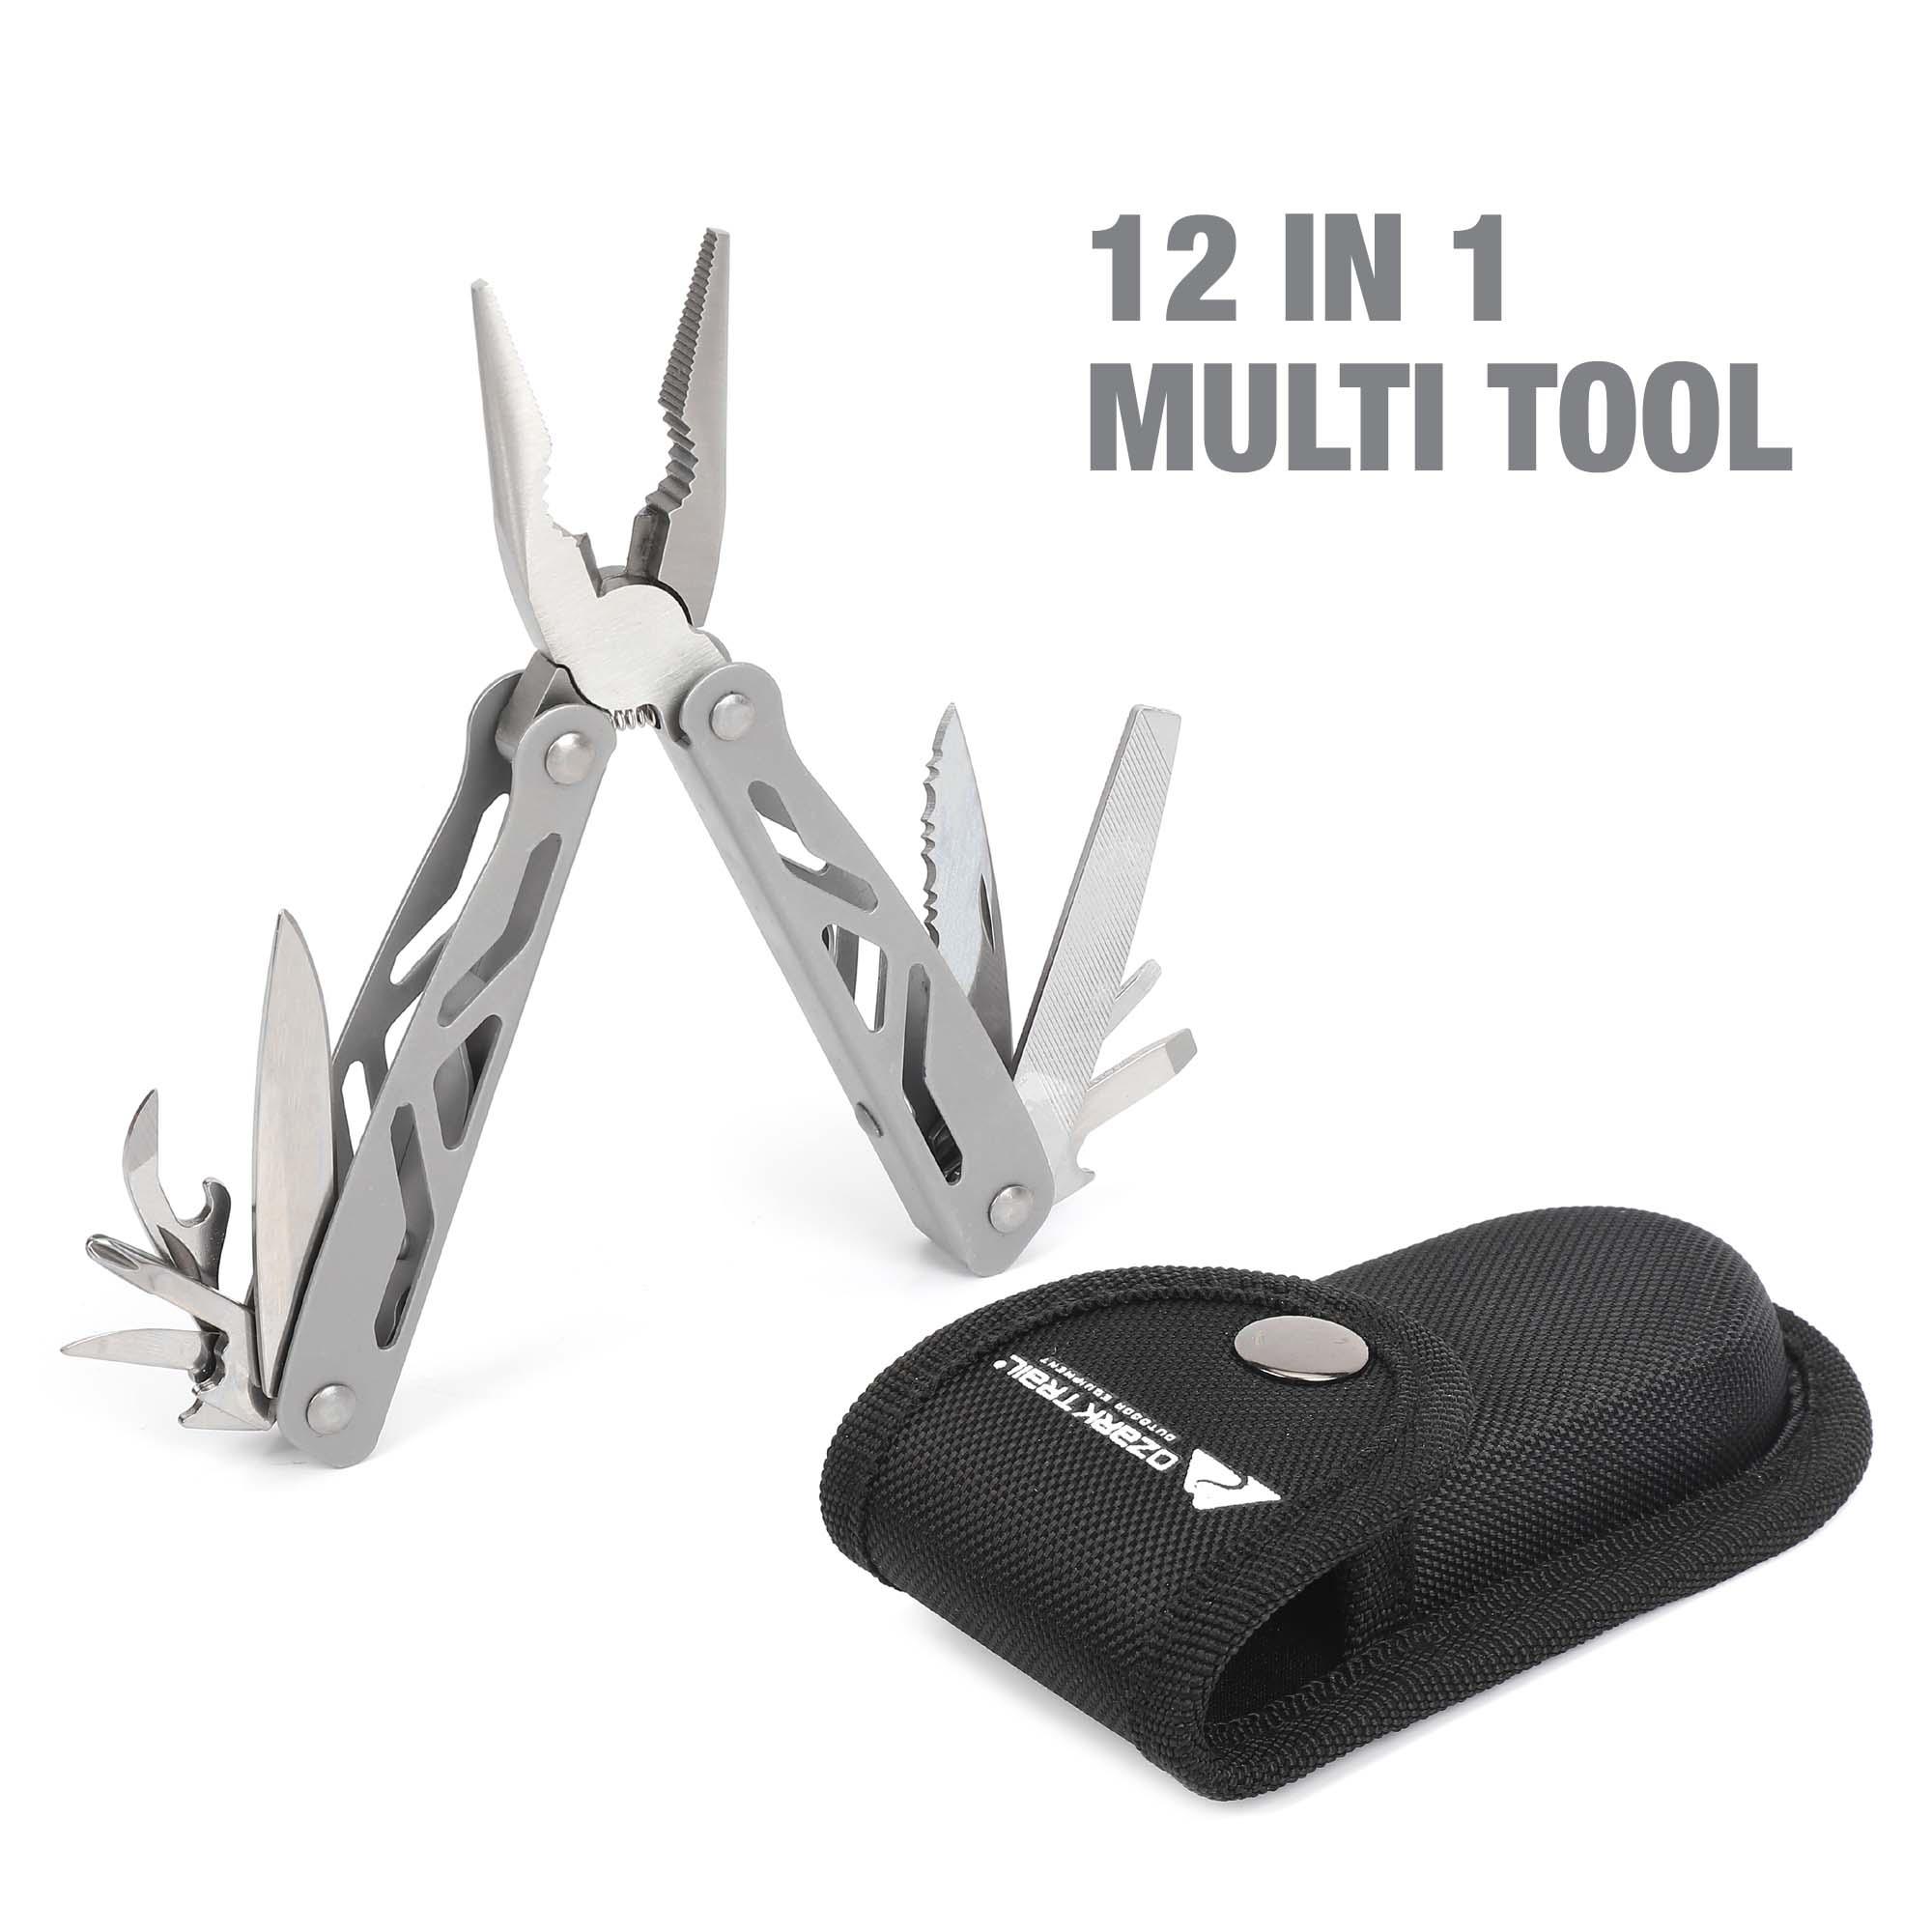 Ozark Trail Camping Steel 12-in-1 Multi-Tool with Sheath for $4.87